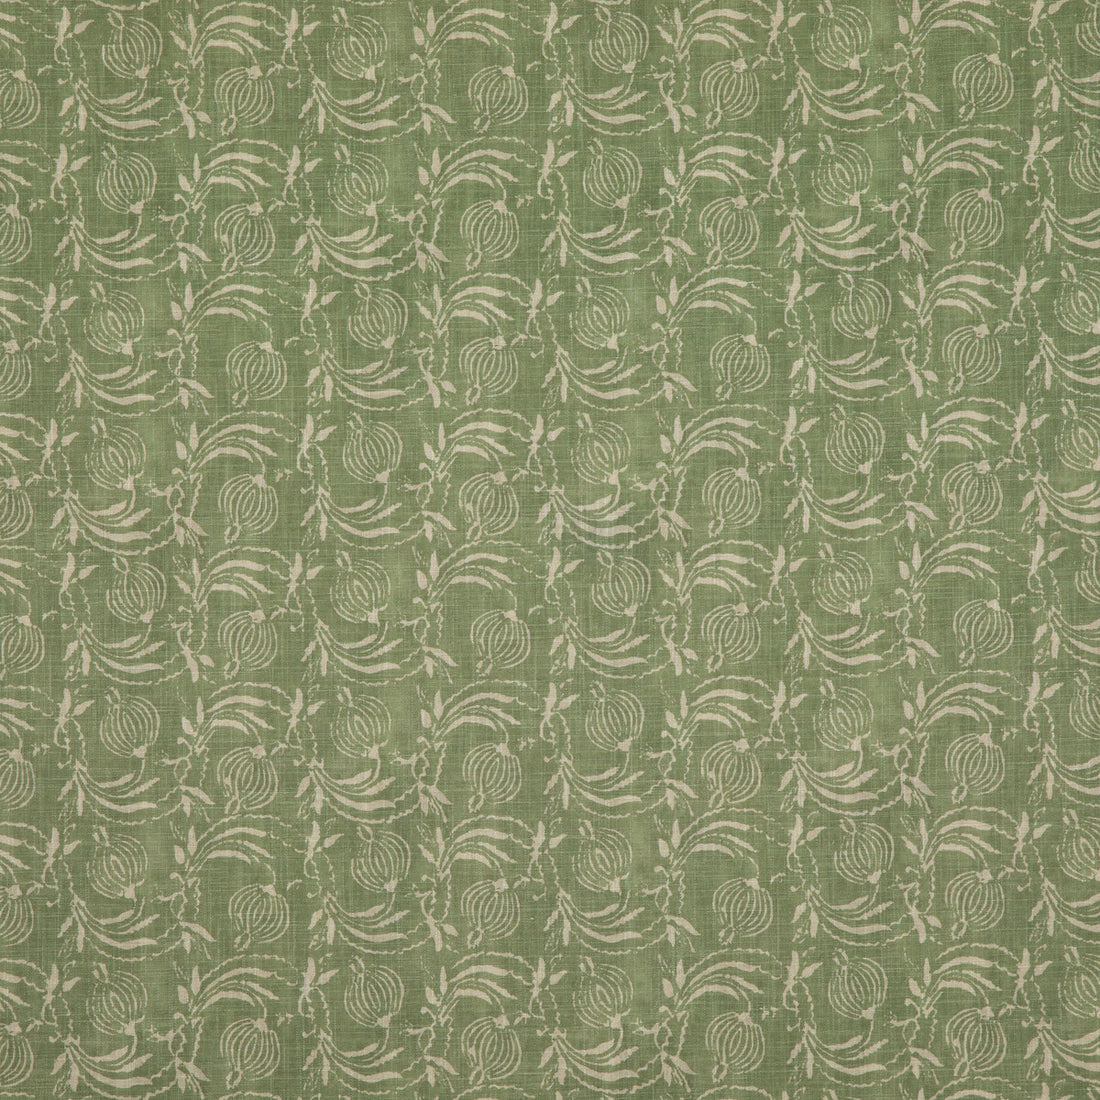 Pomegranate fabric in green color - pattern BP10825.3.0 - by G P &amp; J Baker in the Coromandel Small Prints collection